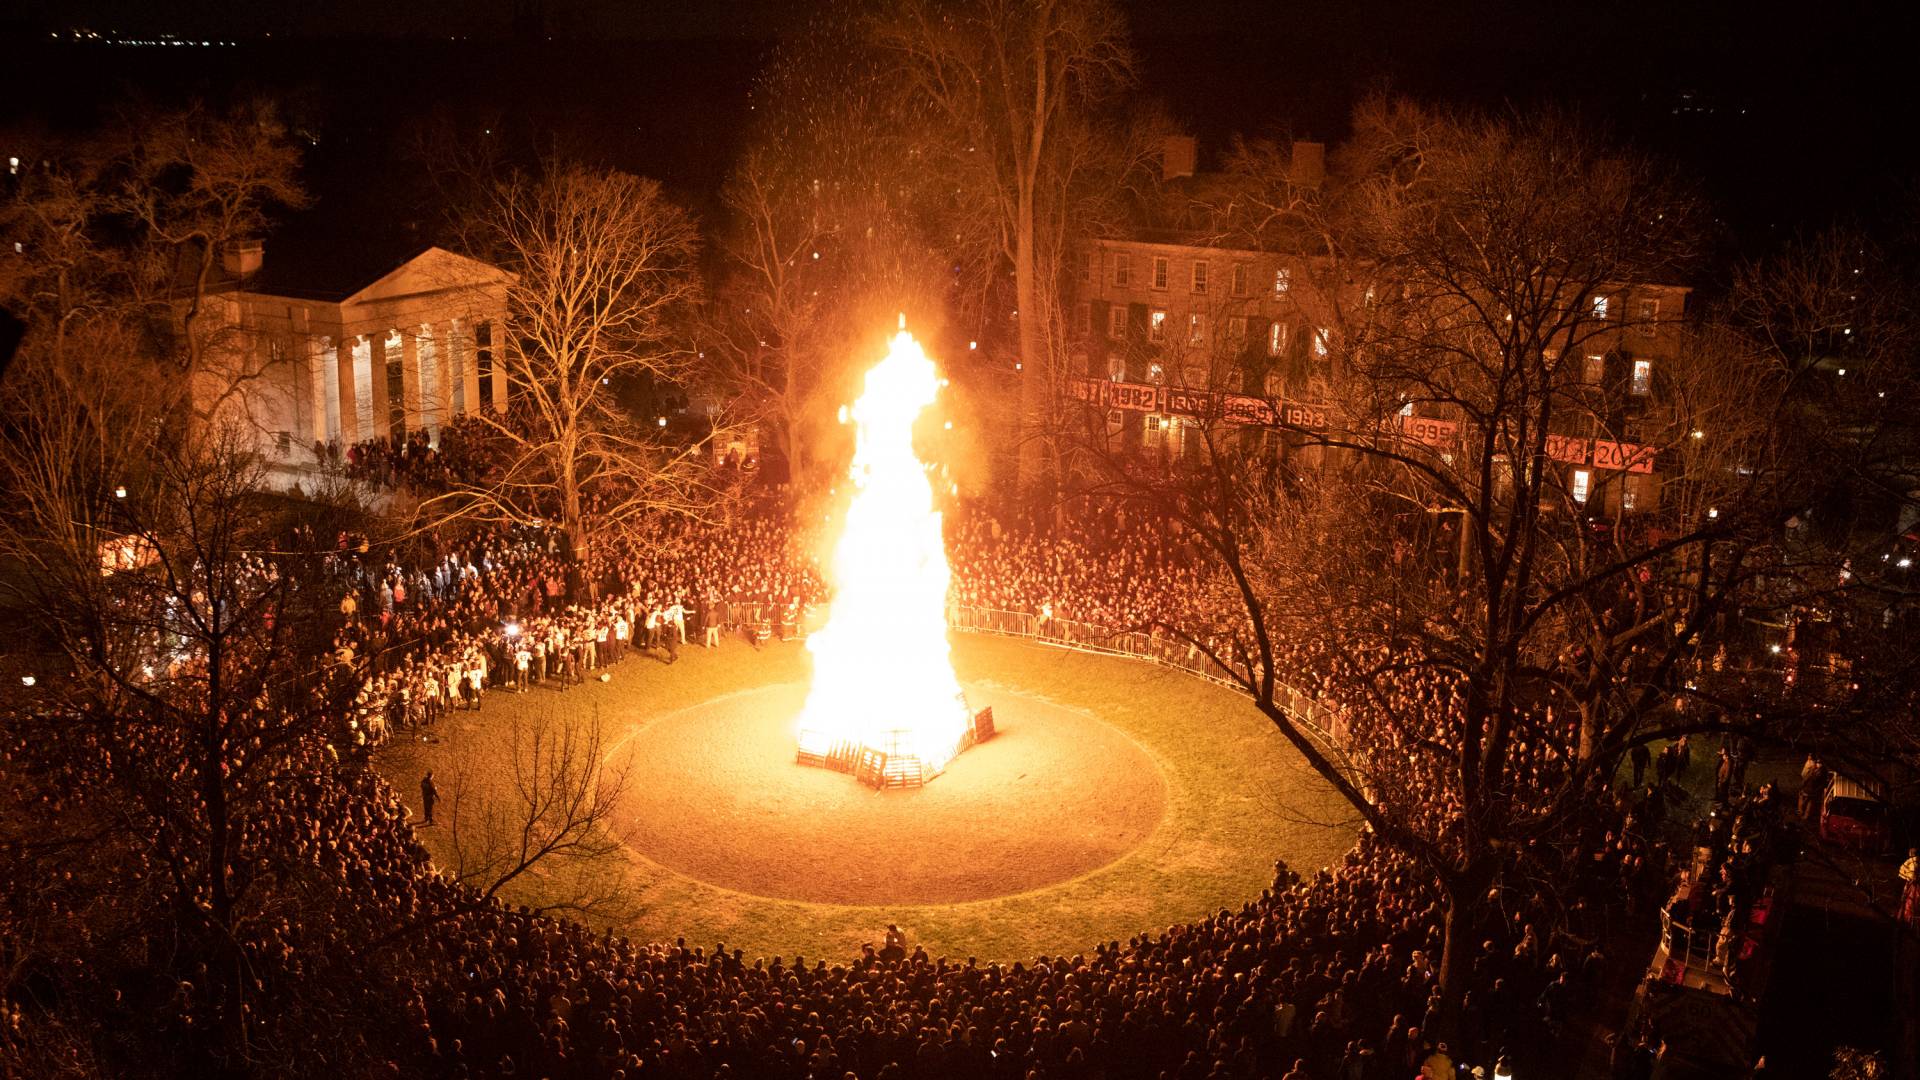 The bonfire from afar with thousands of students gathered around it